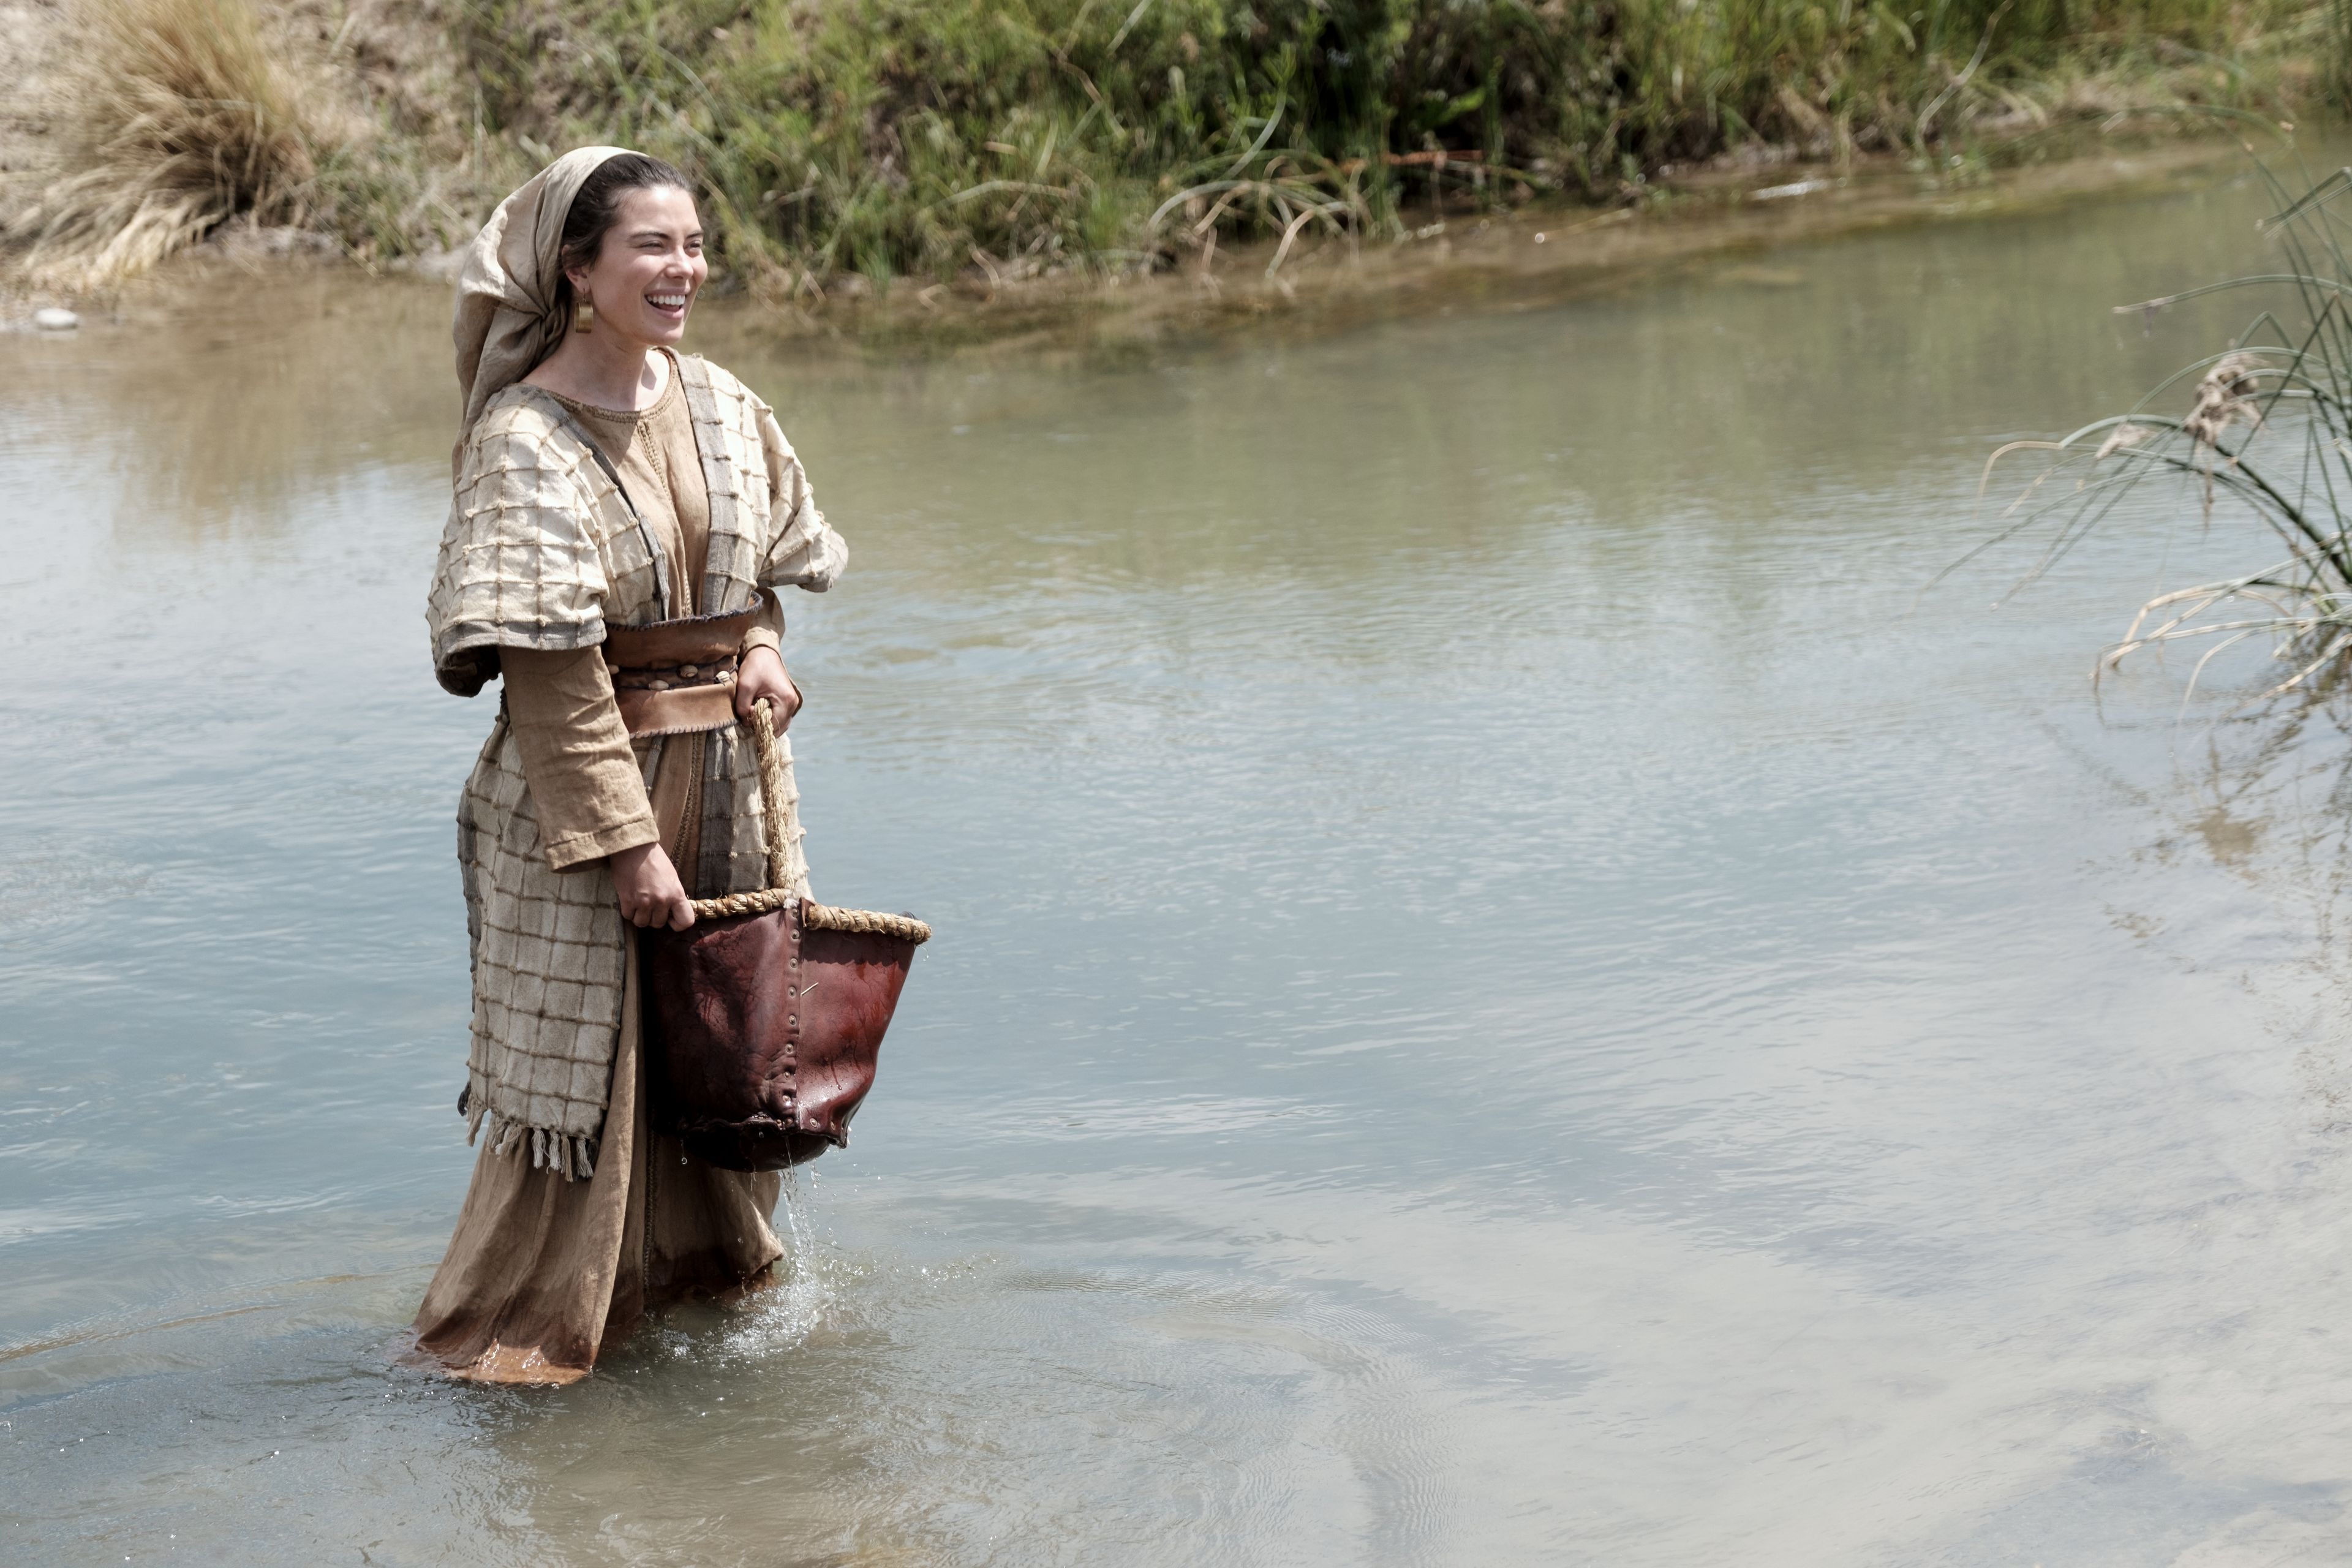 One of Ishmael's daughters gathers water from a stream in the wilderness.